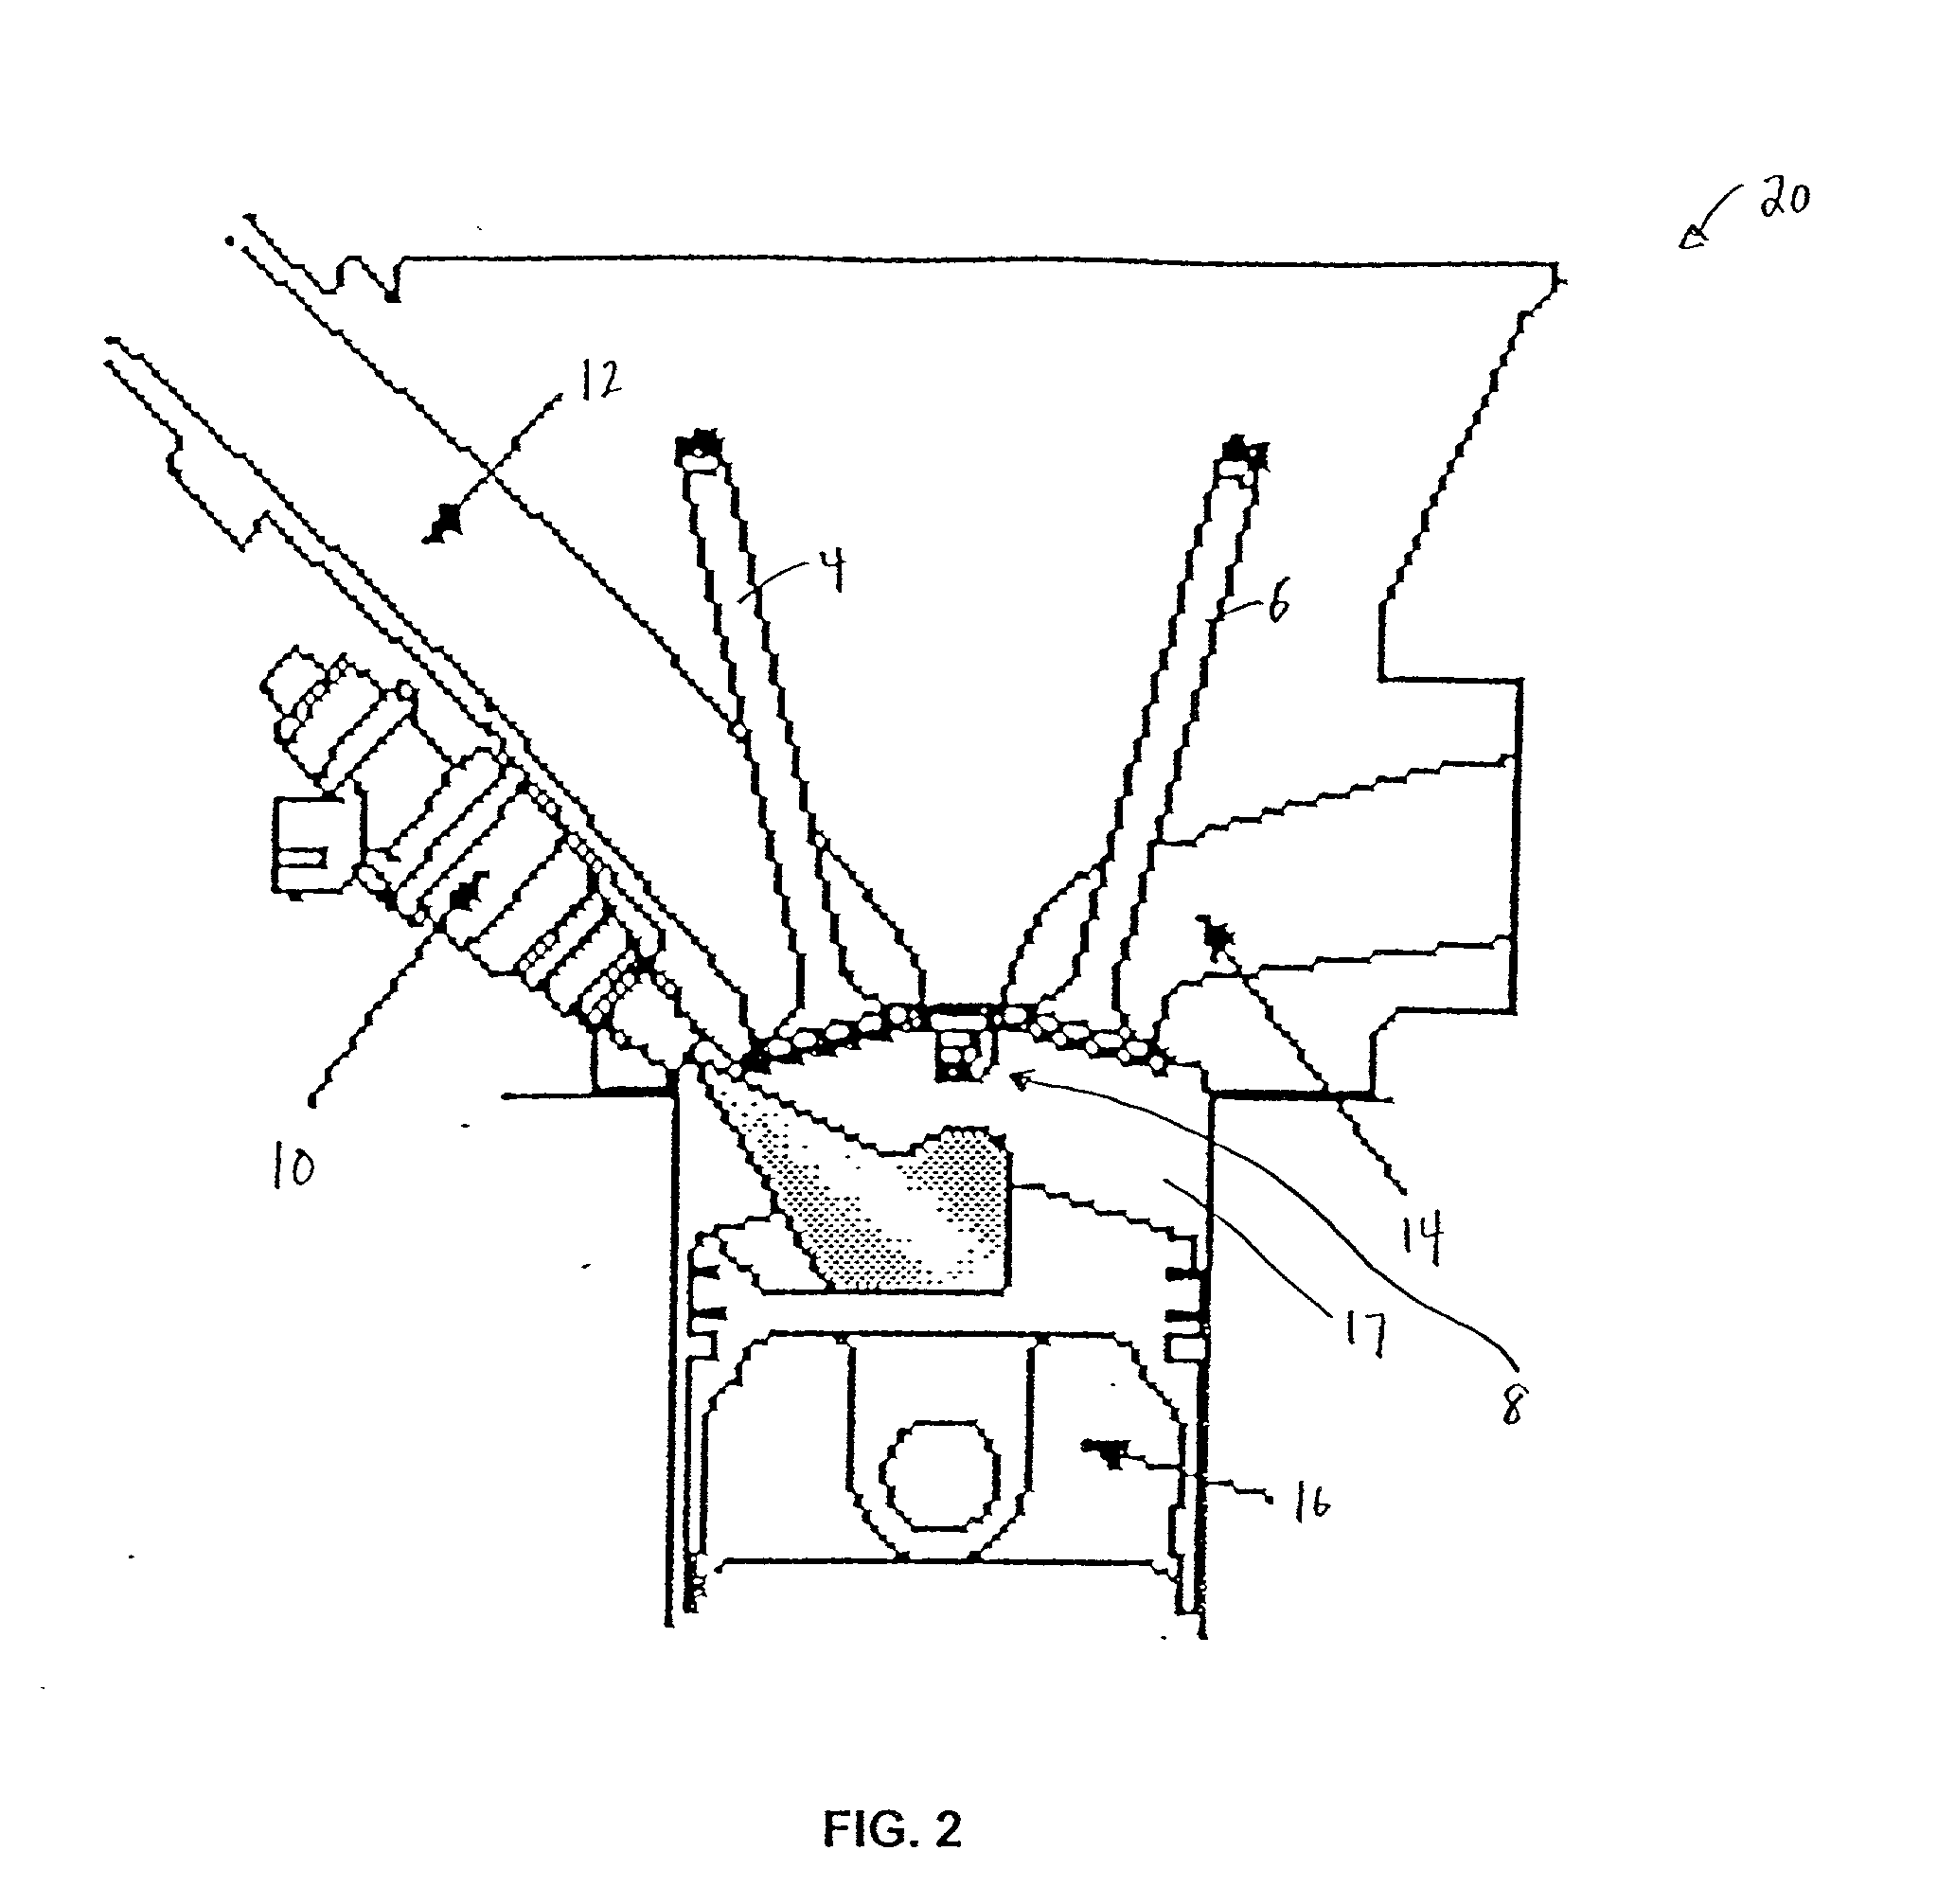 Methods and apparatuses for laser ignited engines